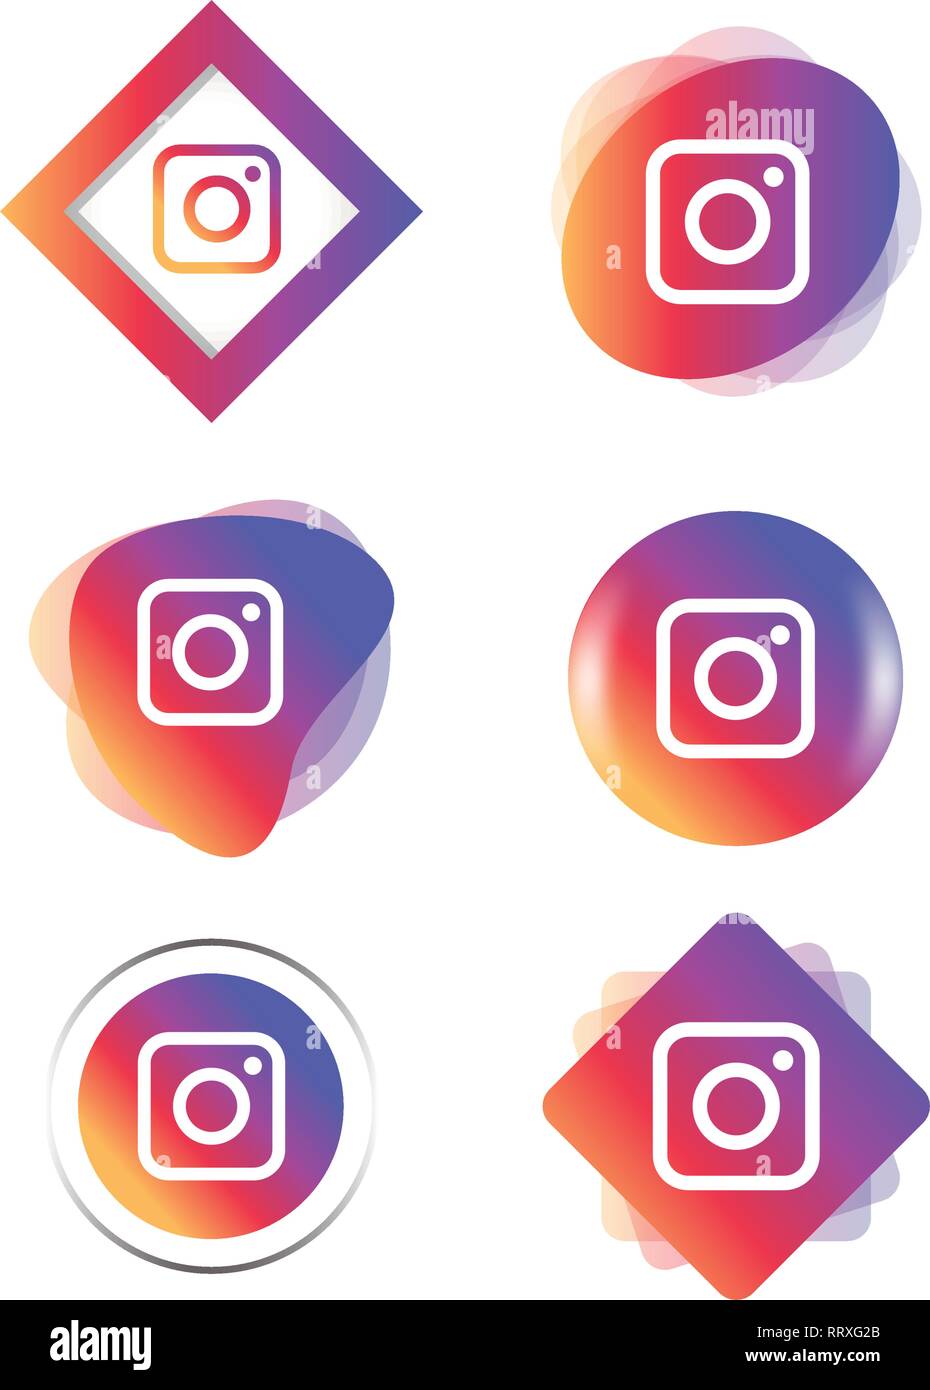 Instagram logo black and white Cut Out Stock Images & Pictures - Alamy